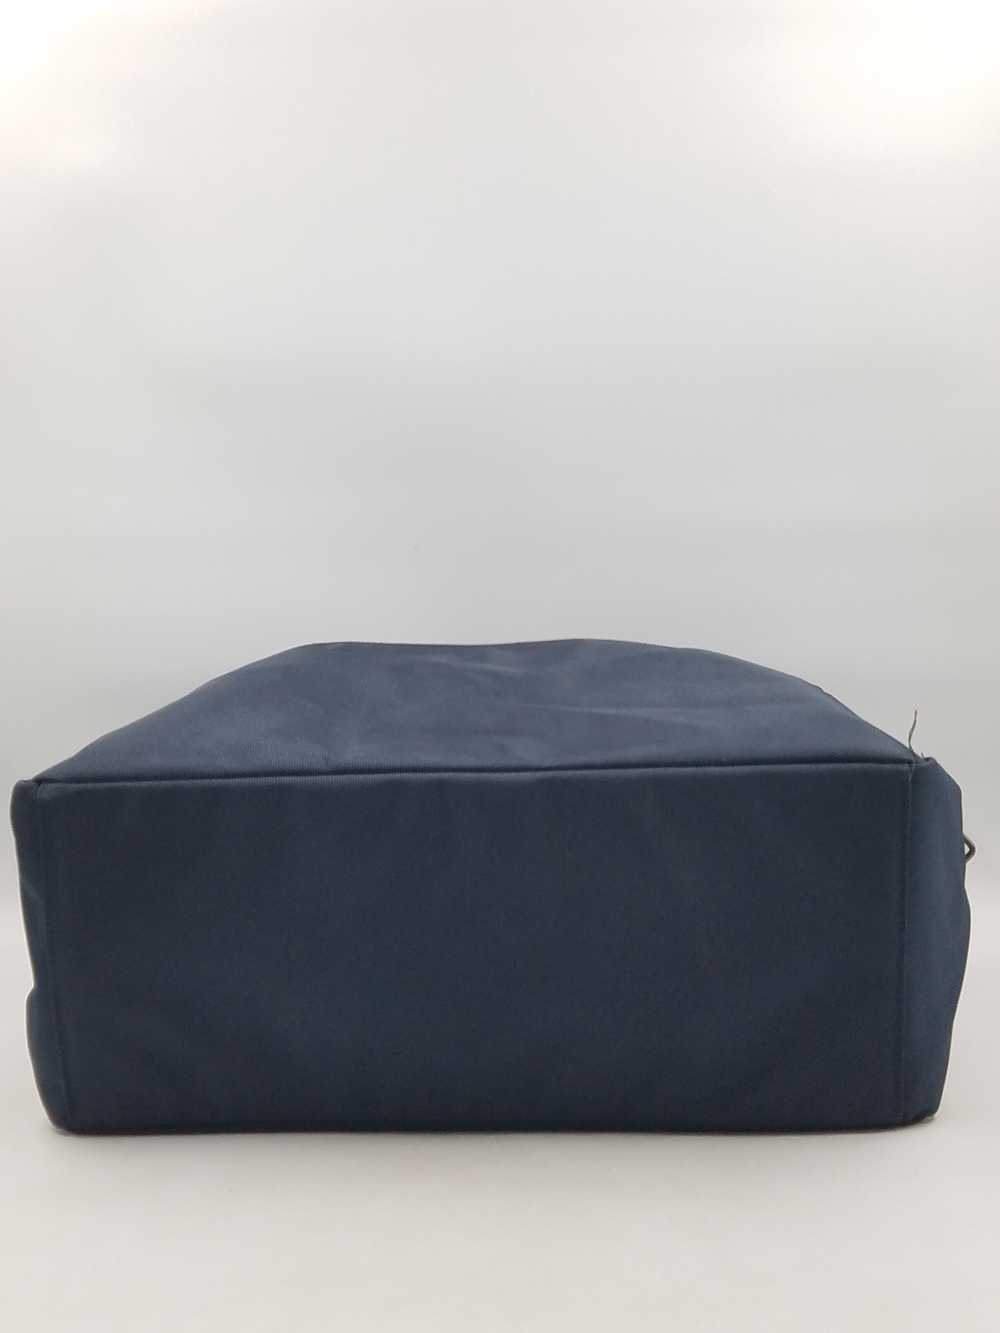 Authentic Jimmy Choo Parfums Navy Duffle Bag - image 4